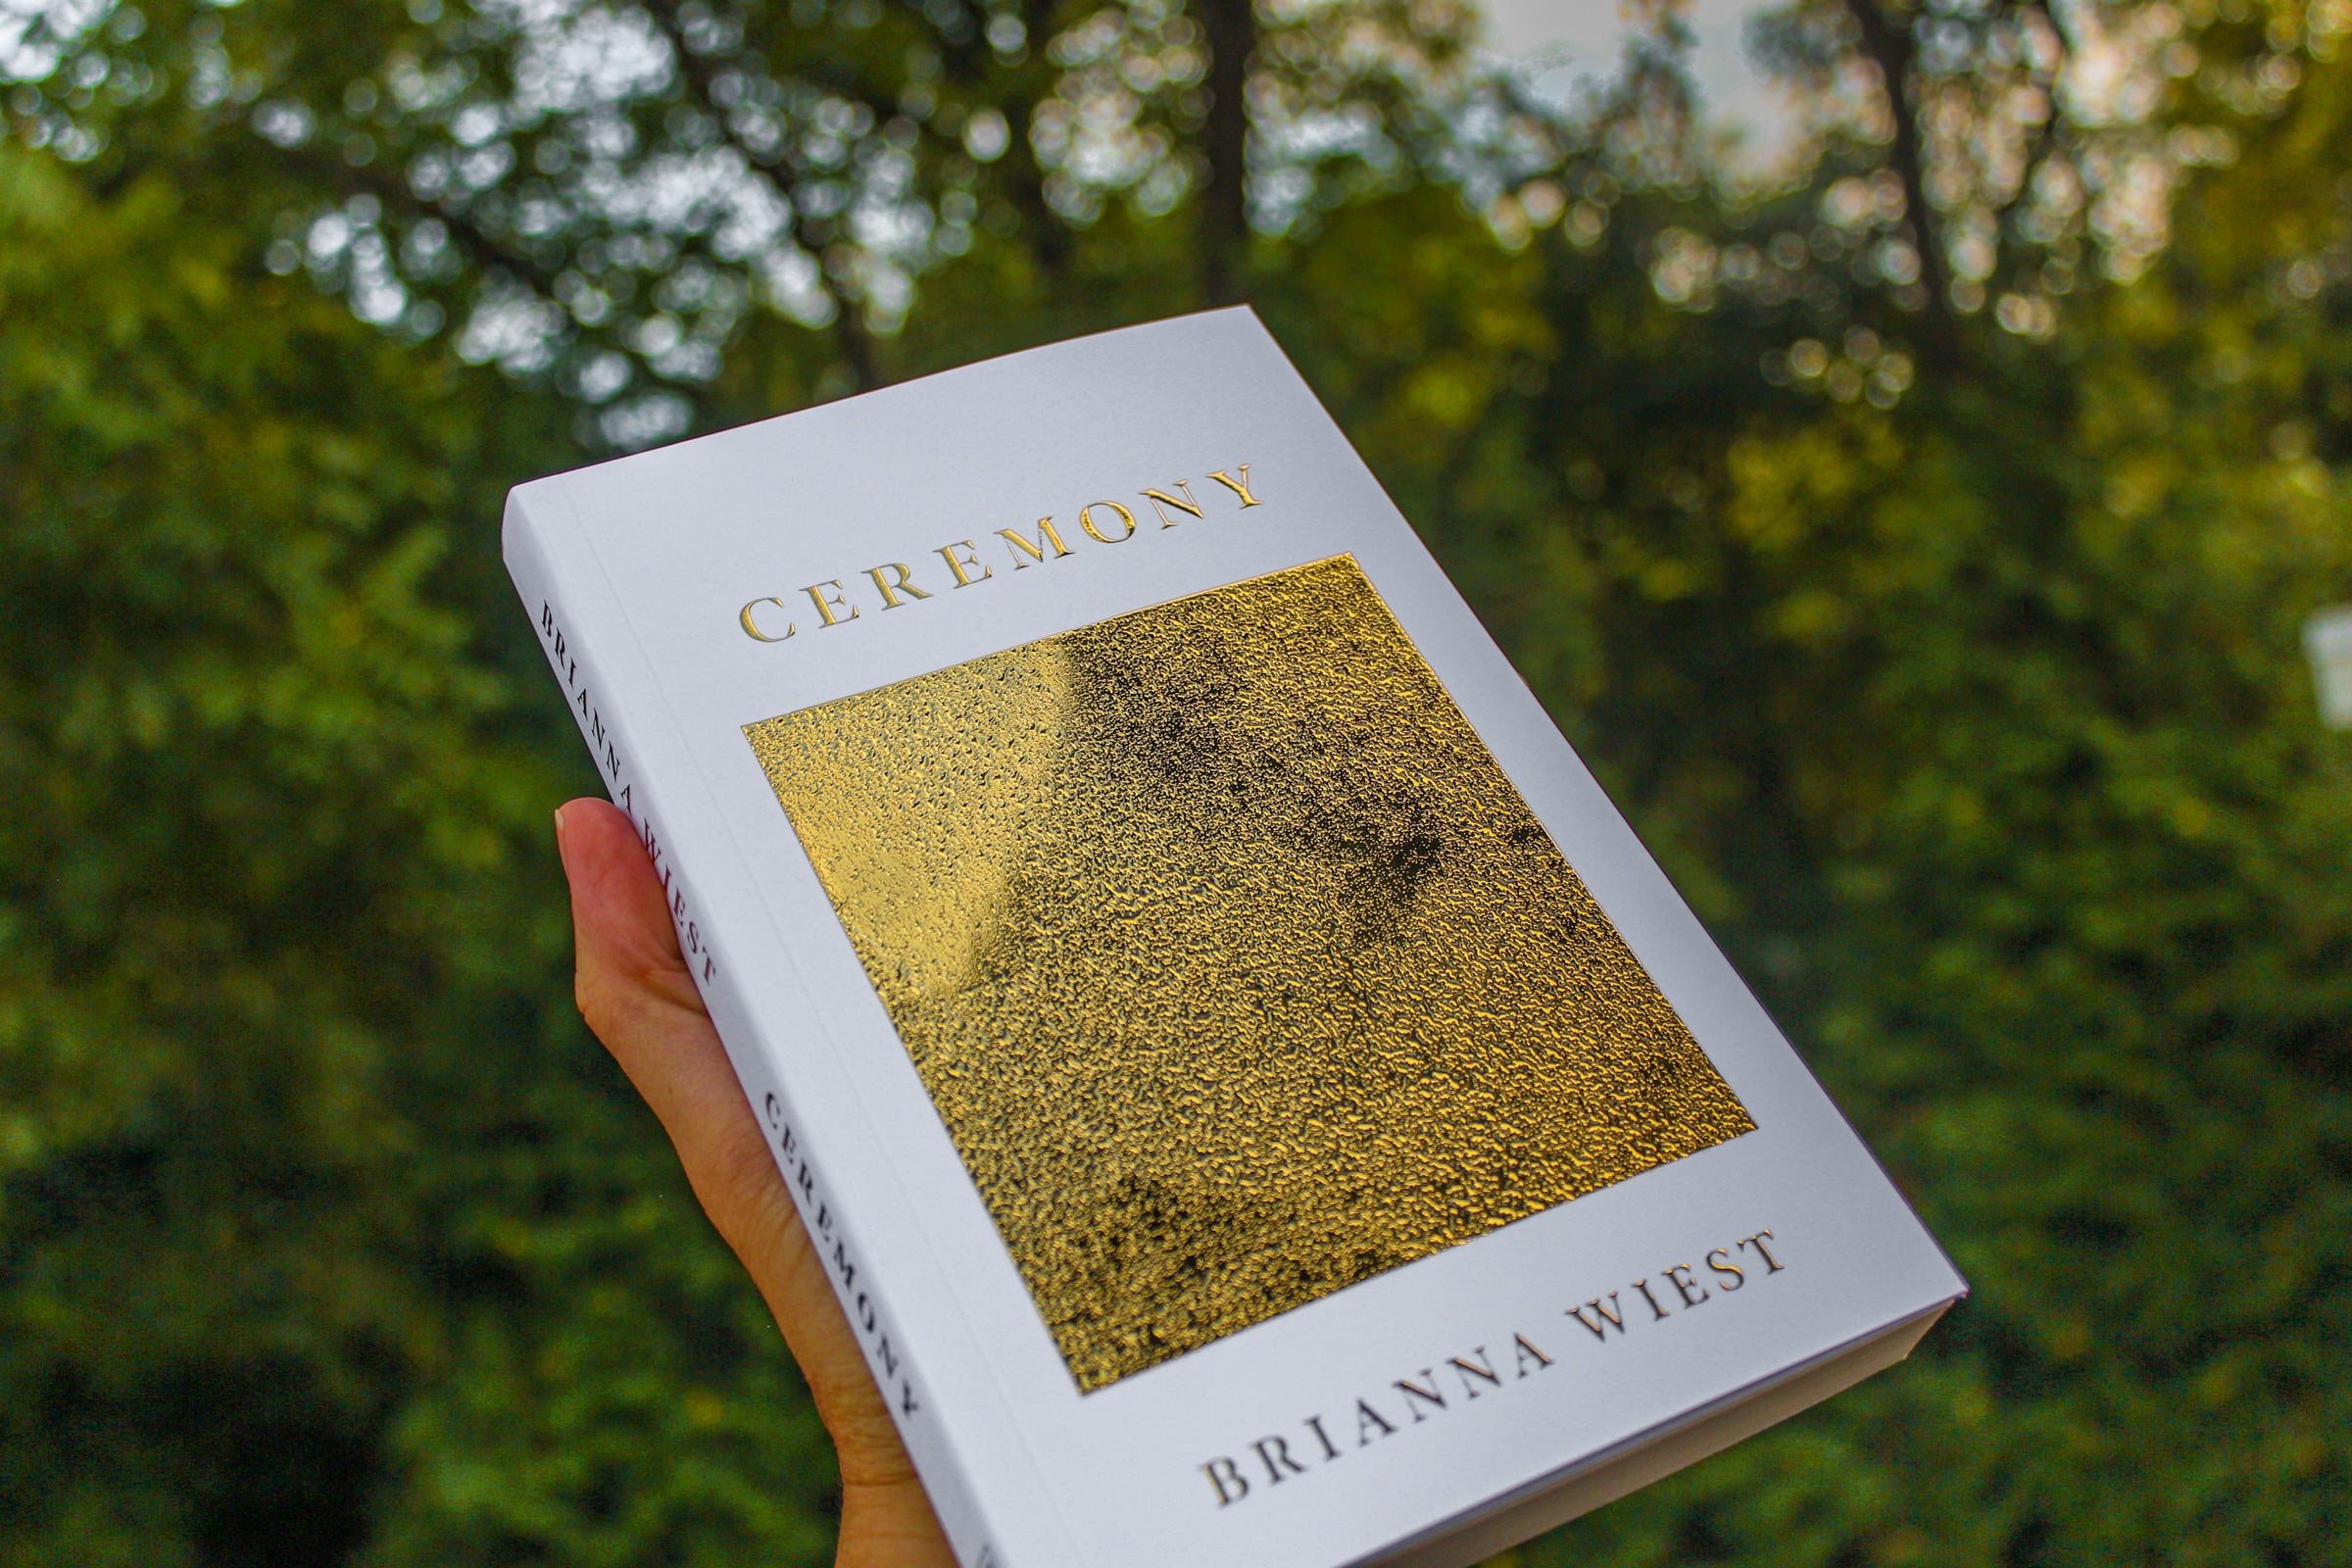 How to Find Beauty in Change with Brianna Wiest's "Ceremony"